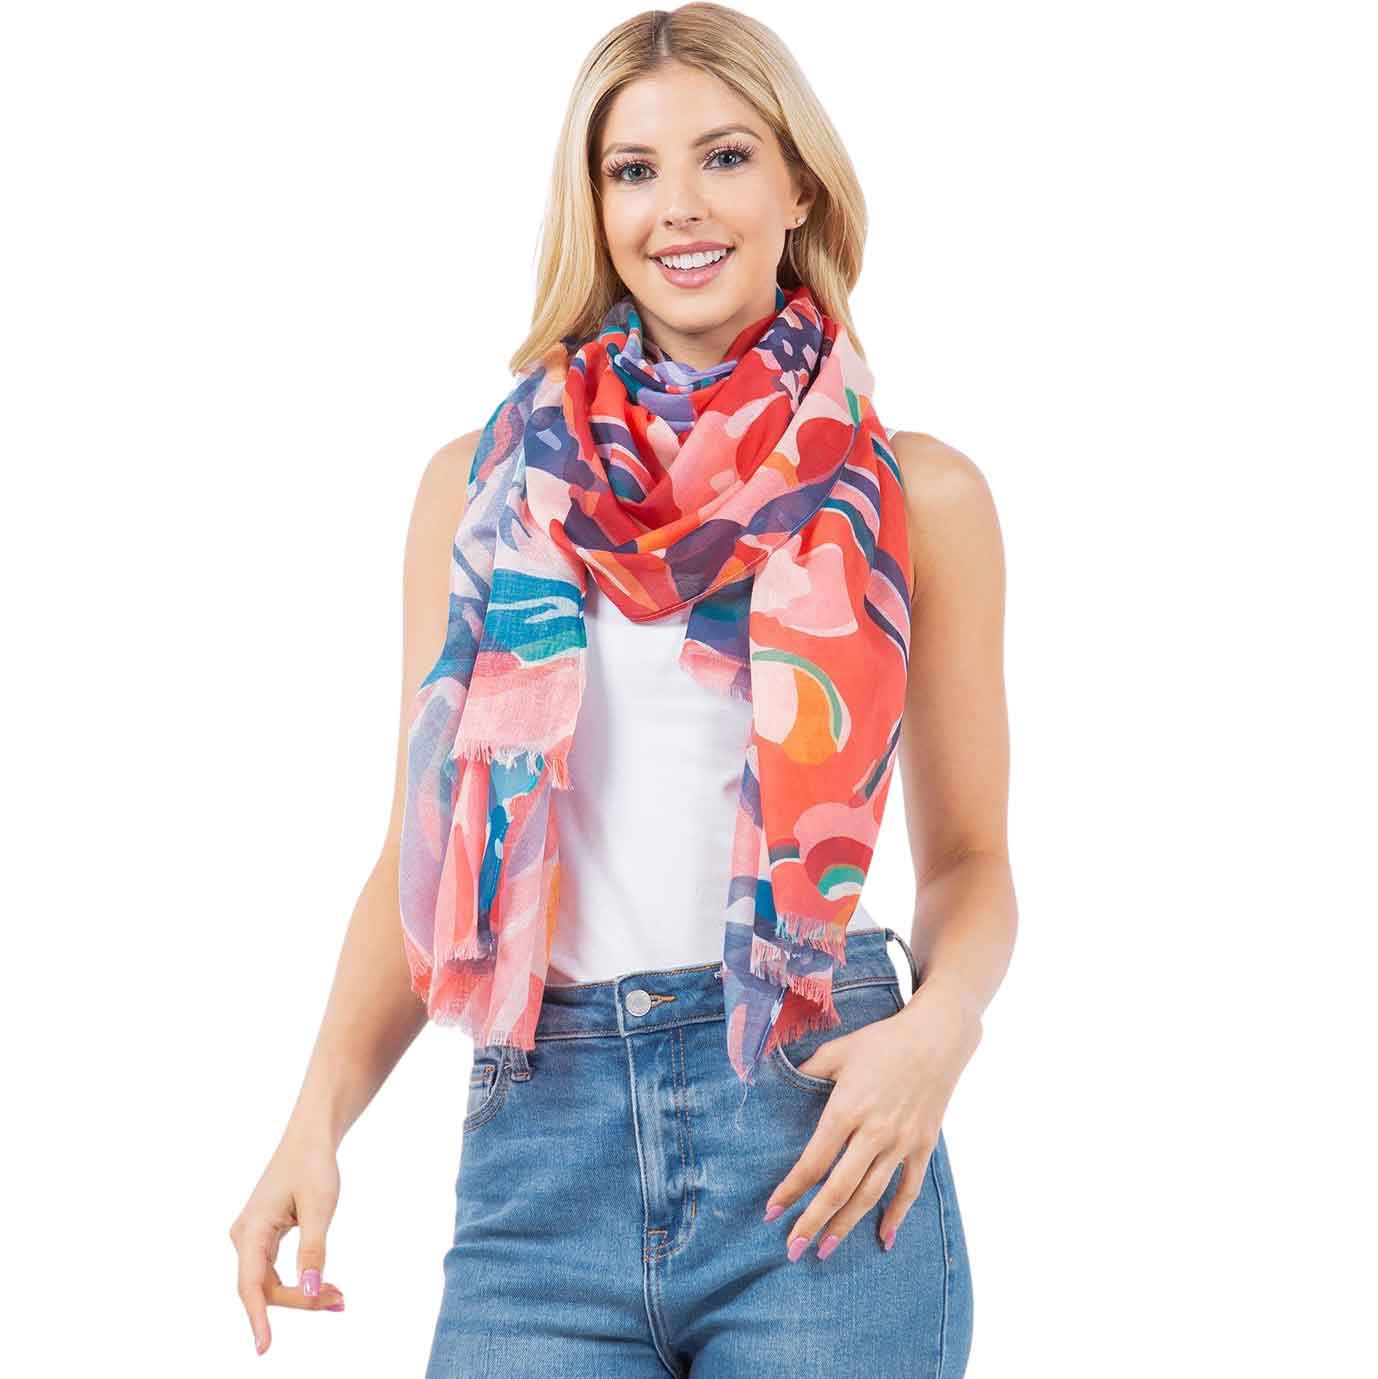 4281-03
Abstract Pattern Scarf